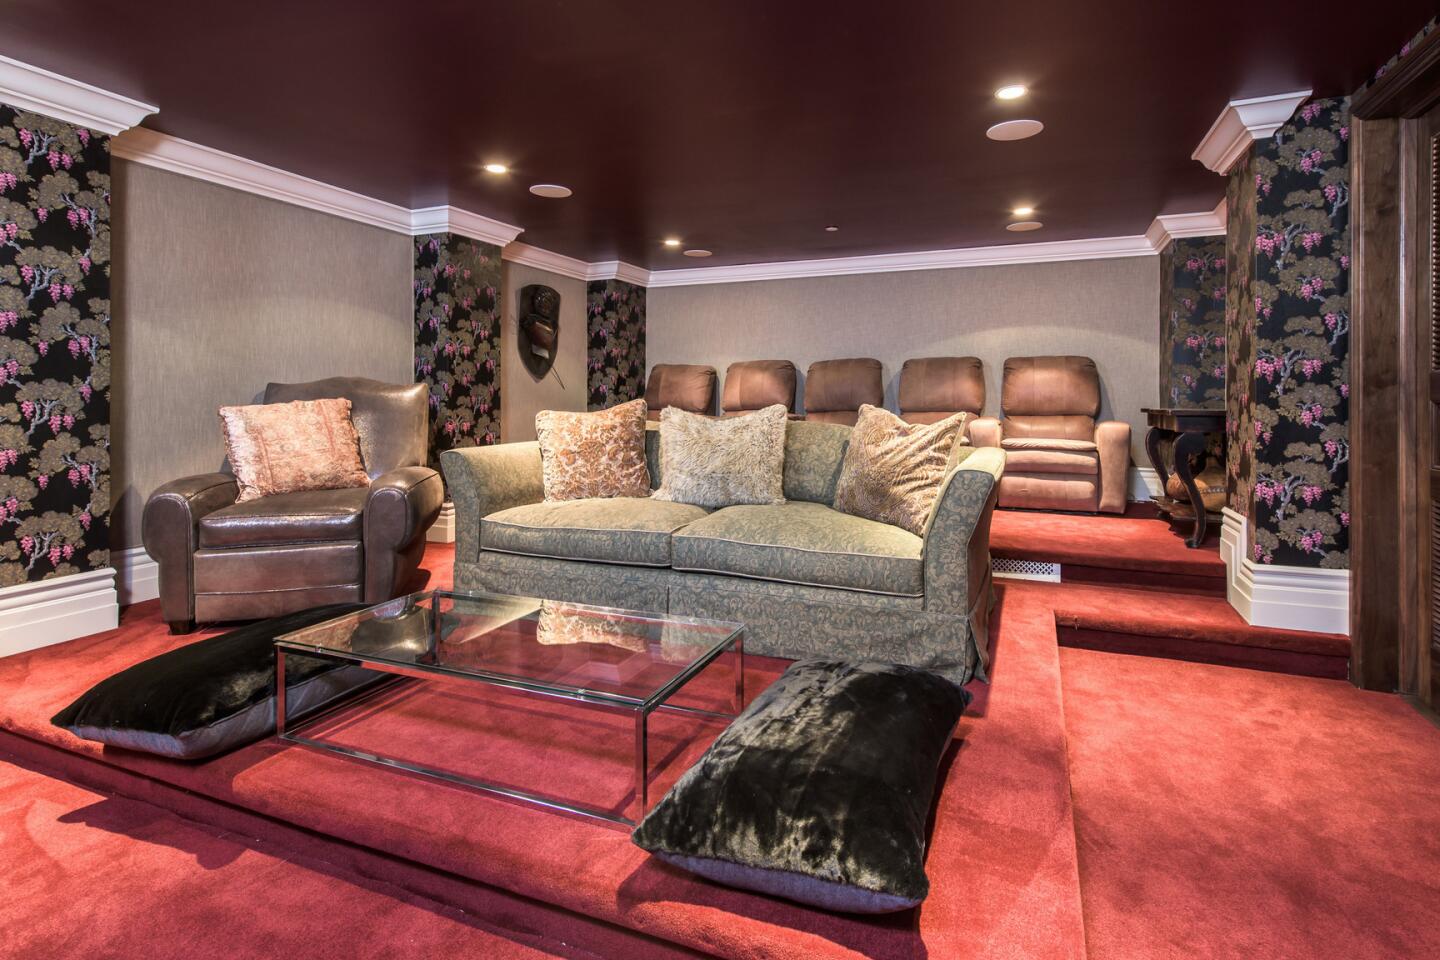 What You Need for Your Luxury Home Theater